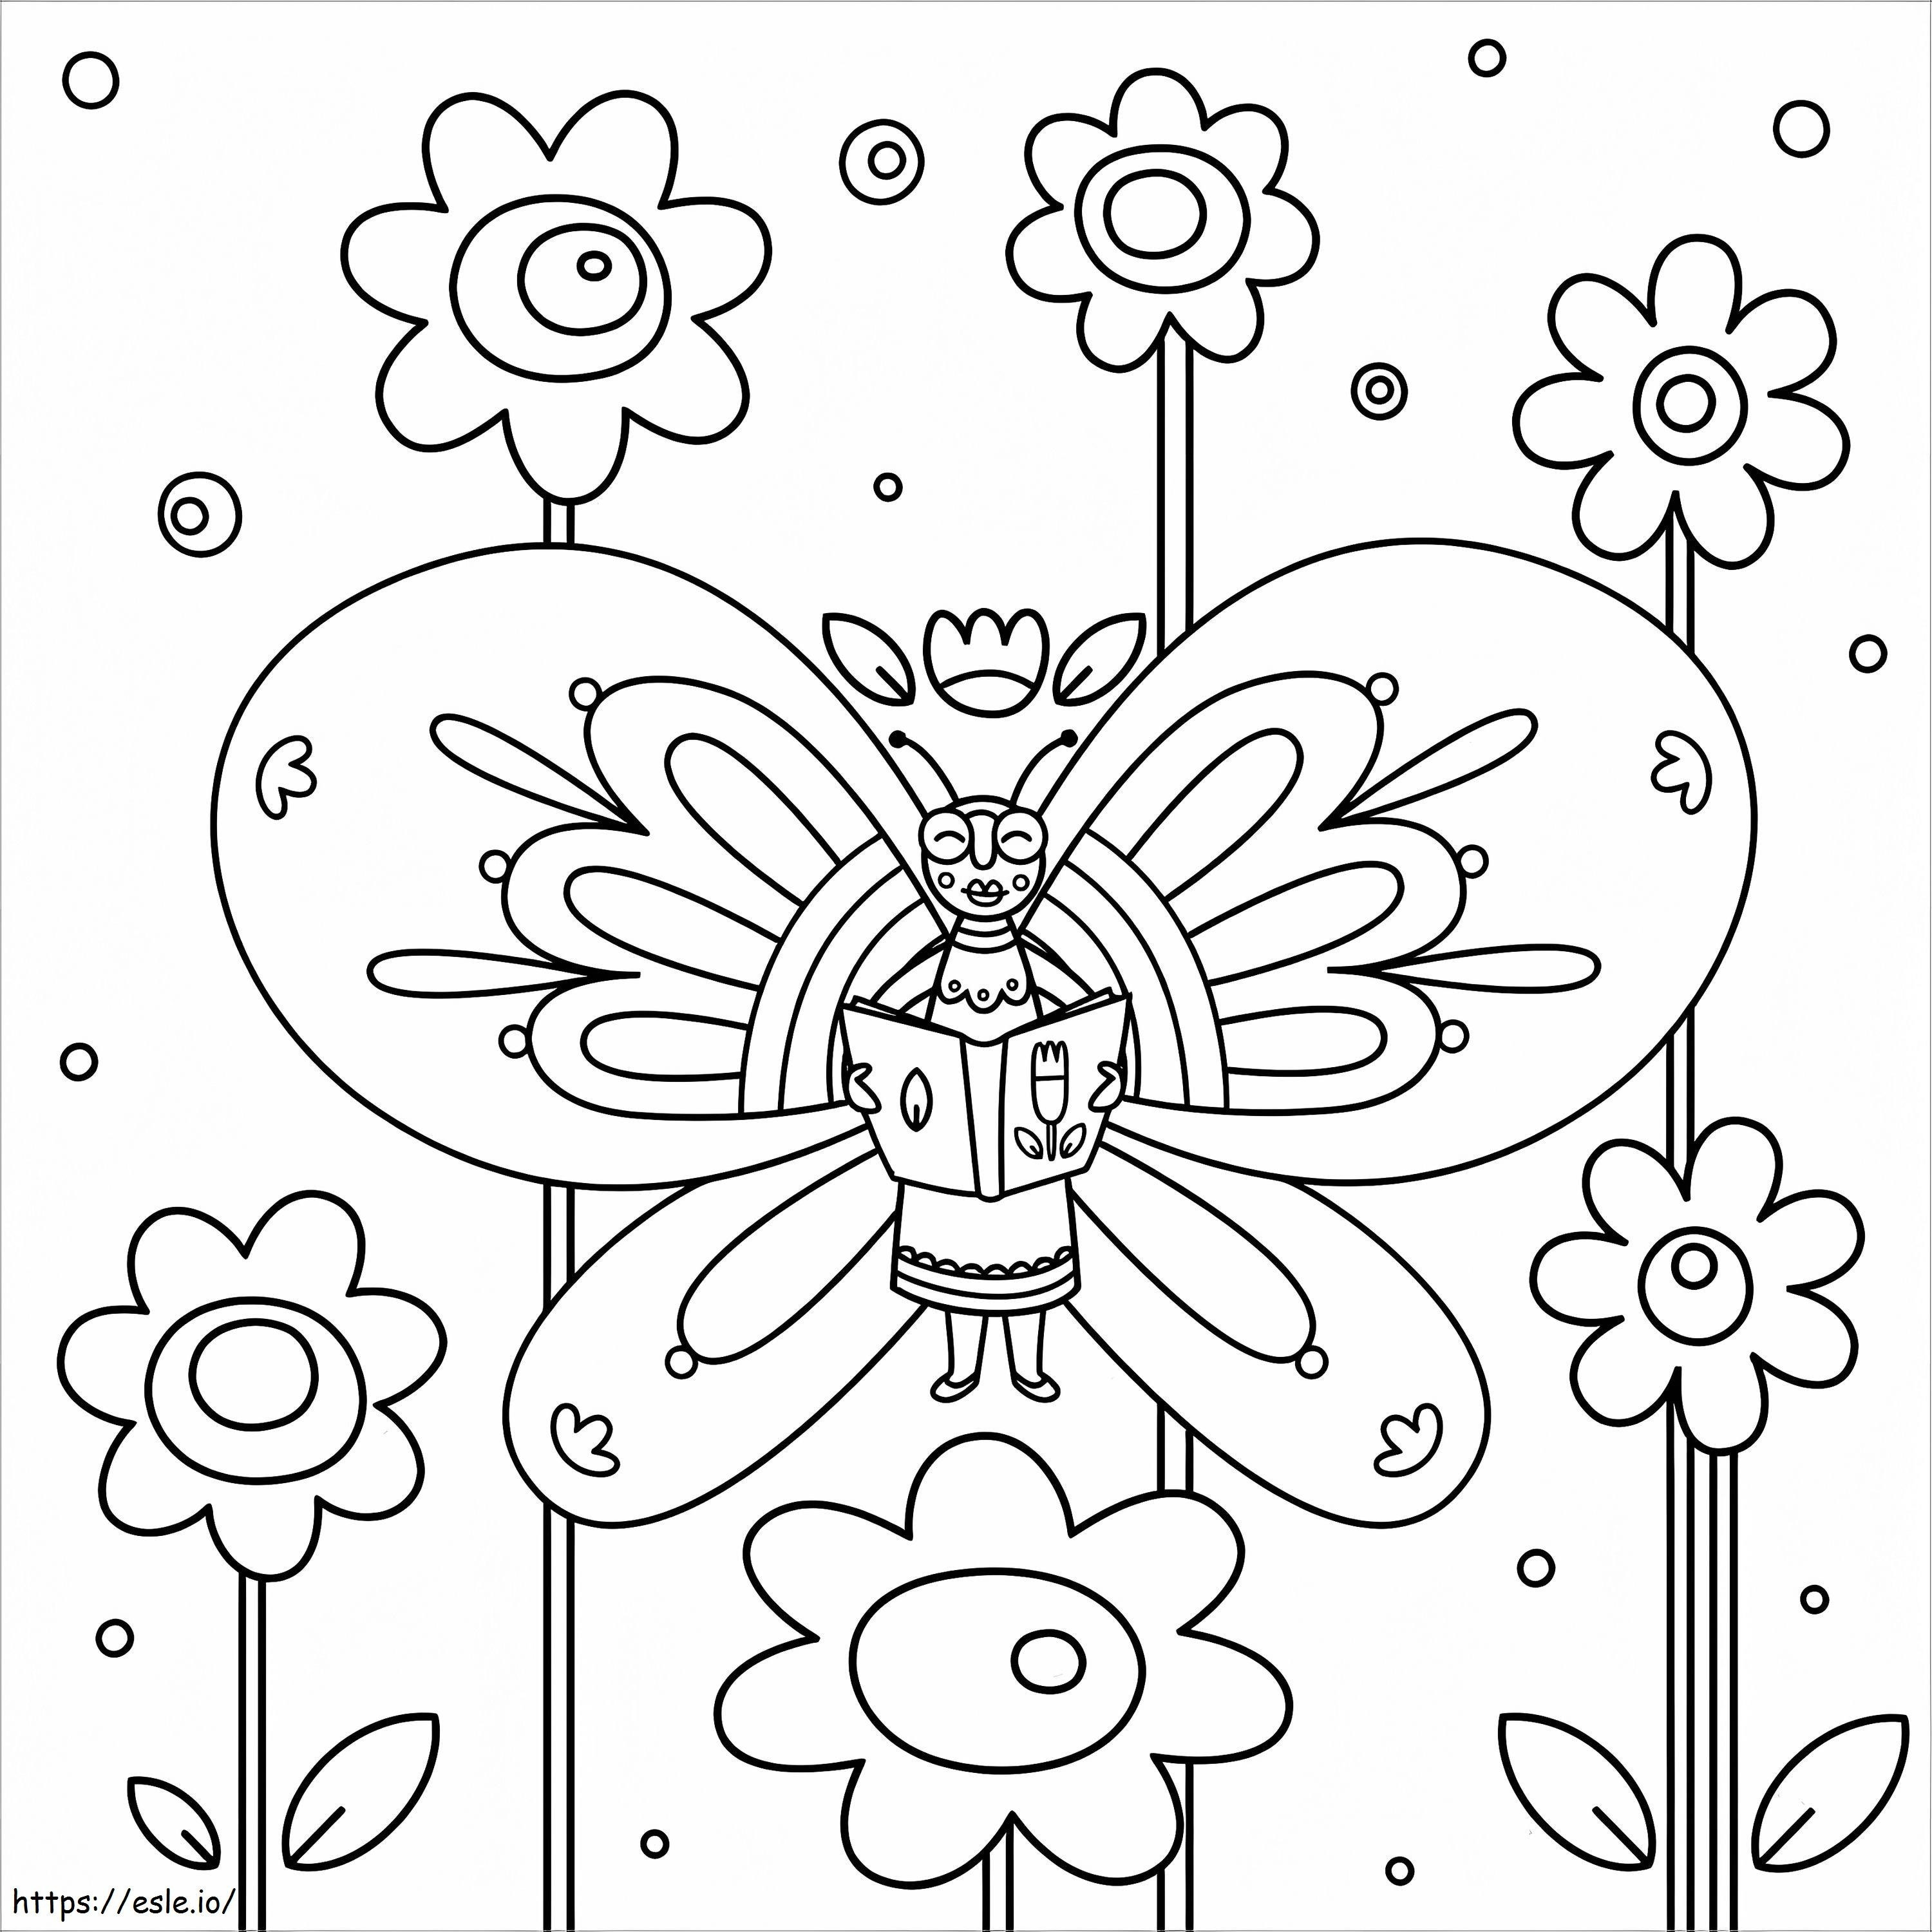 Cute Butterfly coloring page